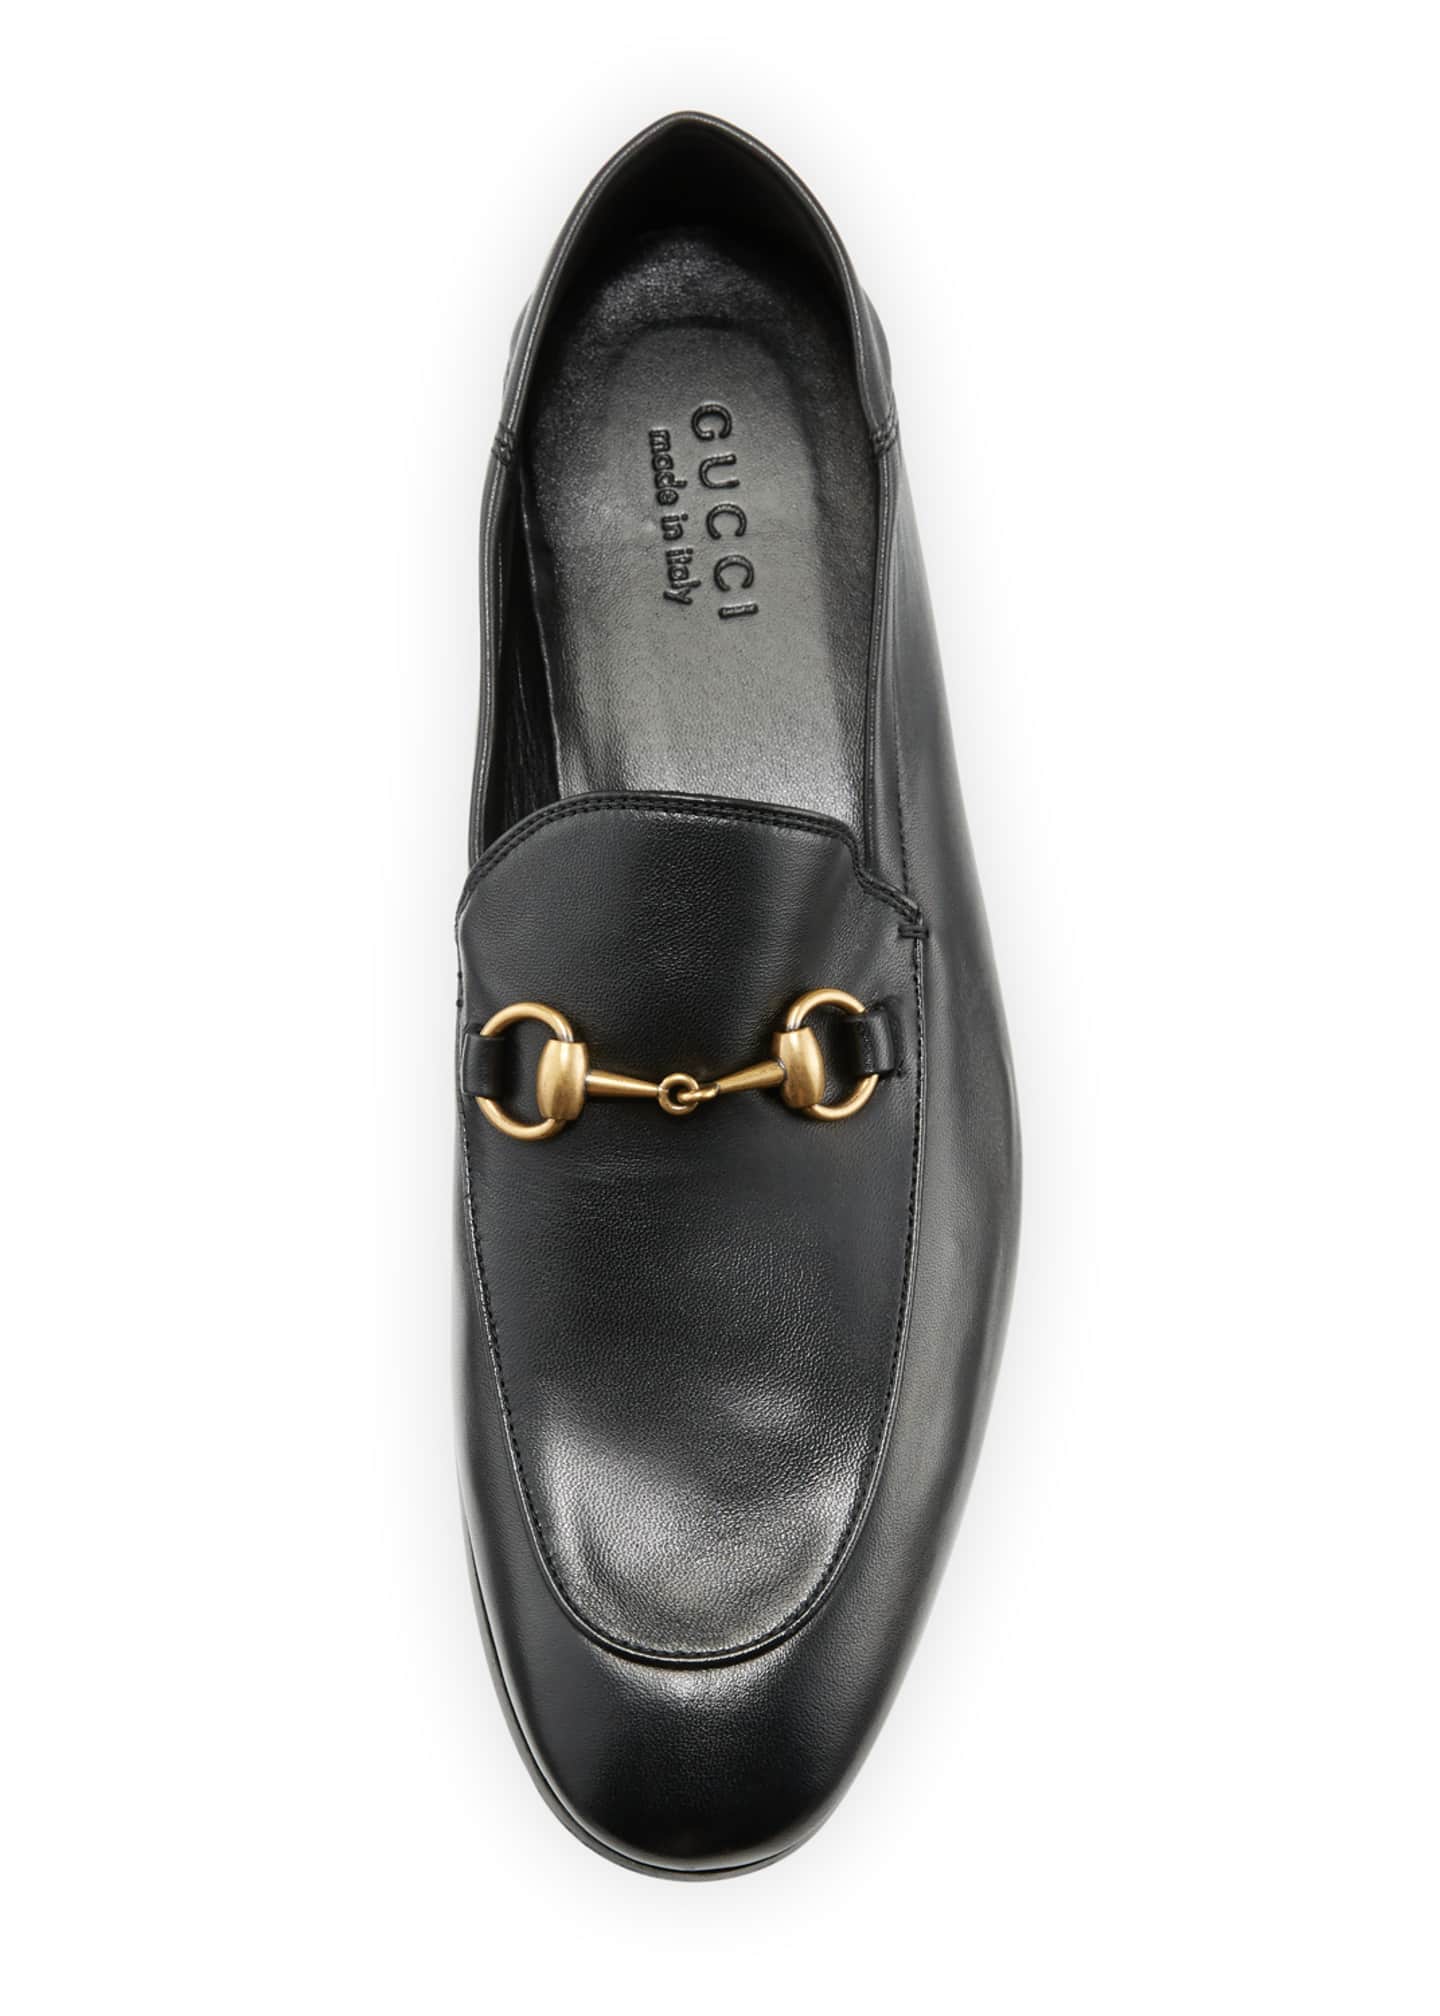 Gucci Soft Leather Bit-Strap Loafer Image 2 of 5